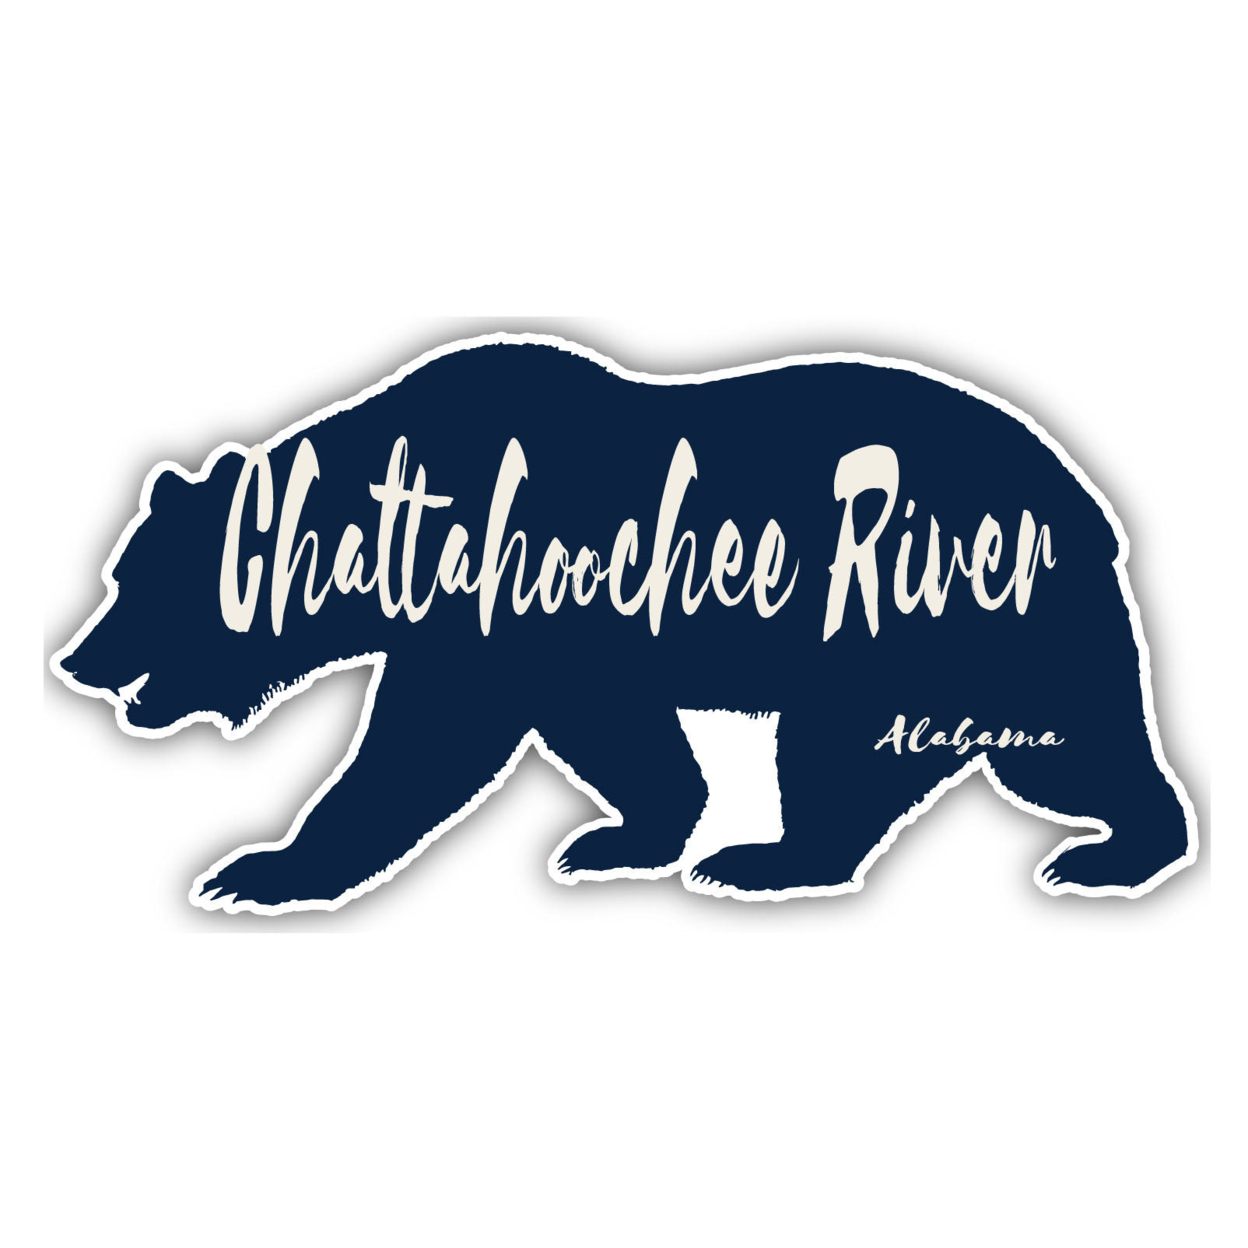 Chattahoochee River Alabama Souvenir Decorative Stickers (Choose Theme And Size) - 4-Pack, 2-Inch, Bear